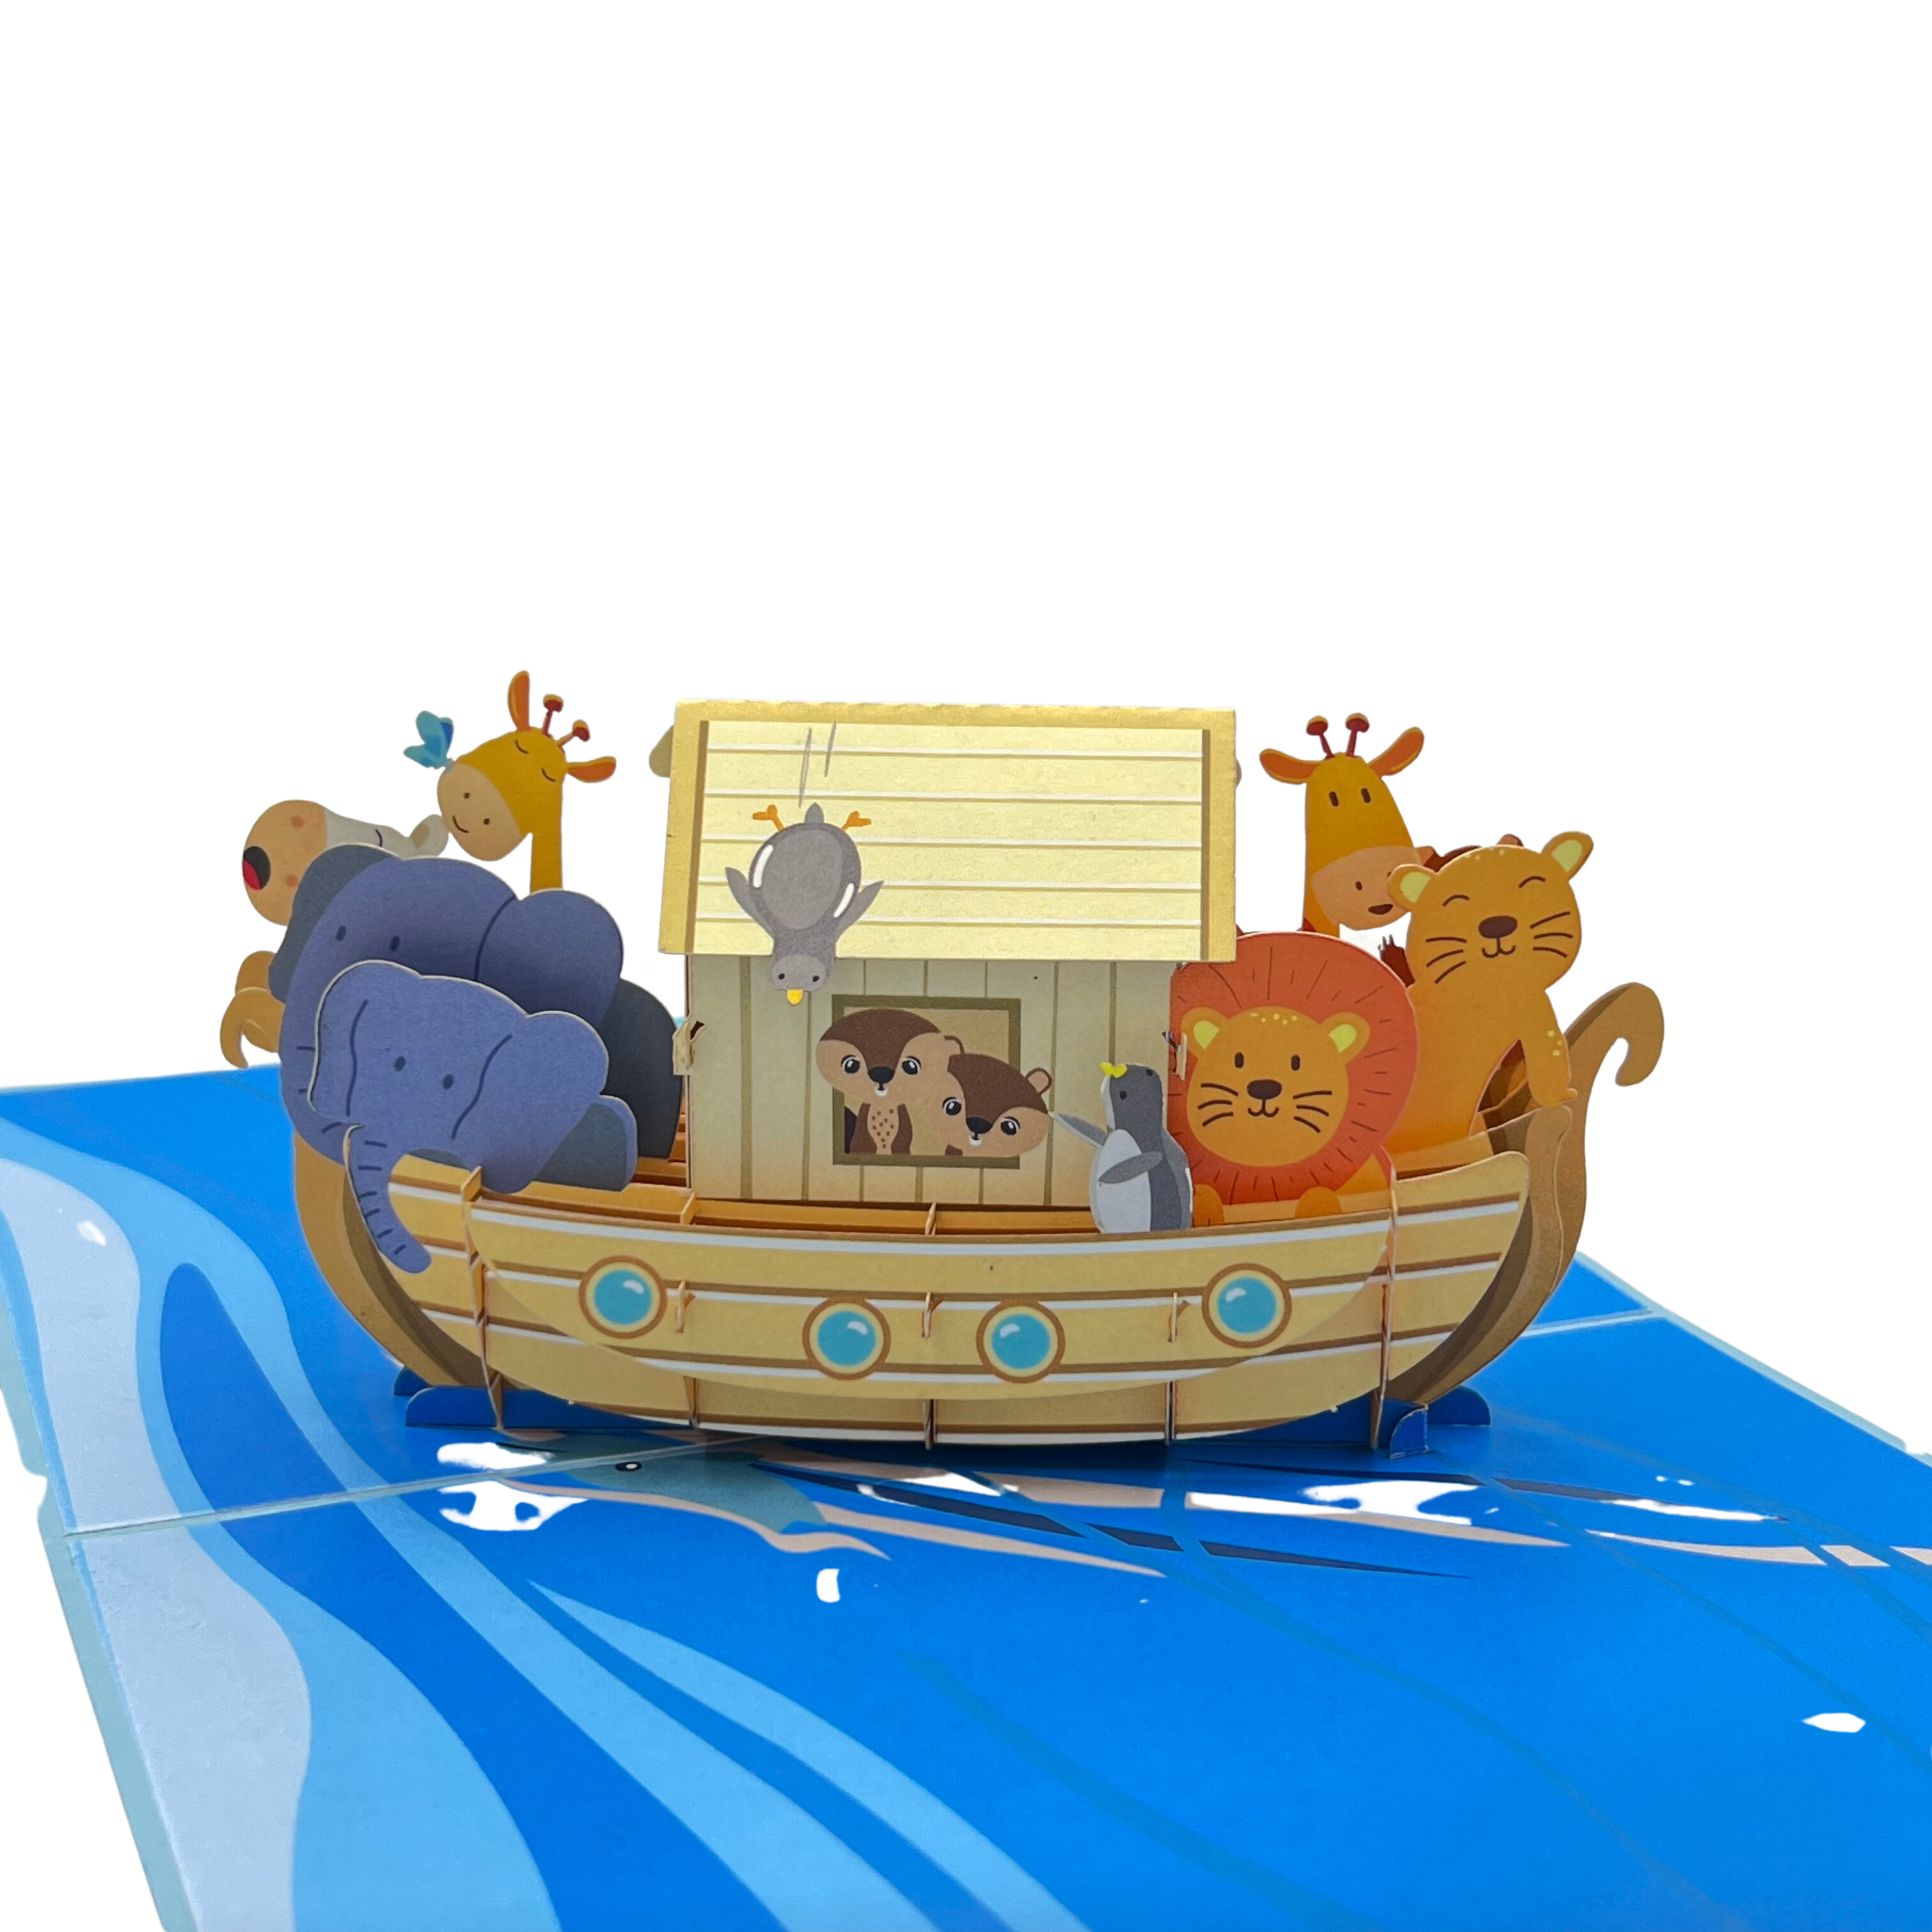 Pop Up Greeting Card Cartoon Animals Boat Adventure Journey Card, Kid Card, Thank you Card, Birthday Card, Family Card, Gift for Children